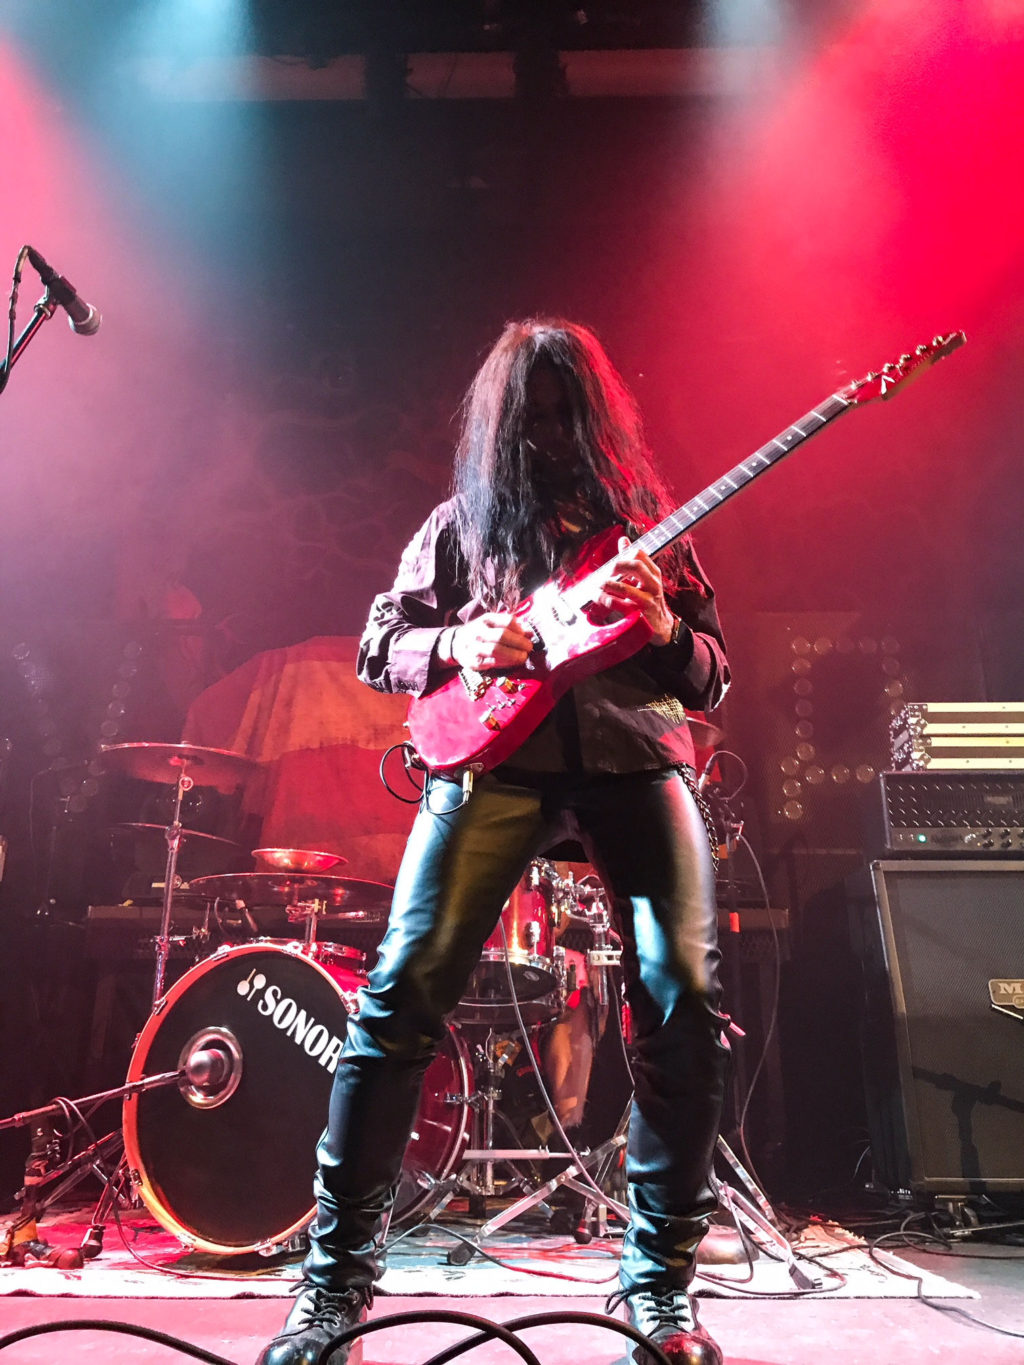 Mike Campese with Avatar, in Poughkeepsi, NY, 10/7/17 pic4.